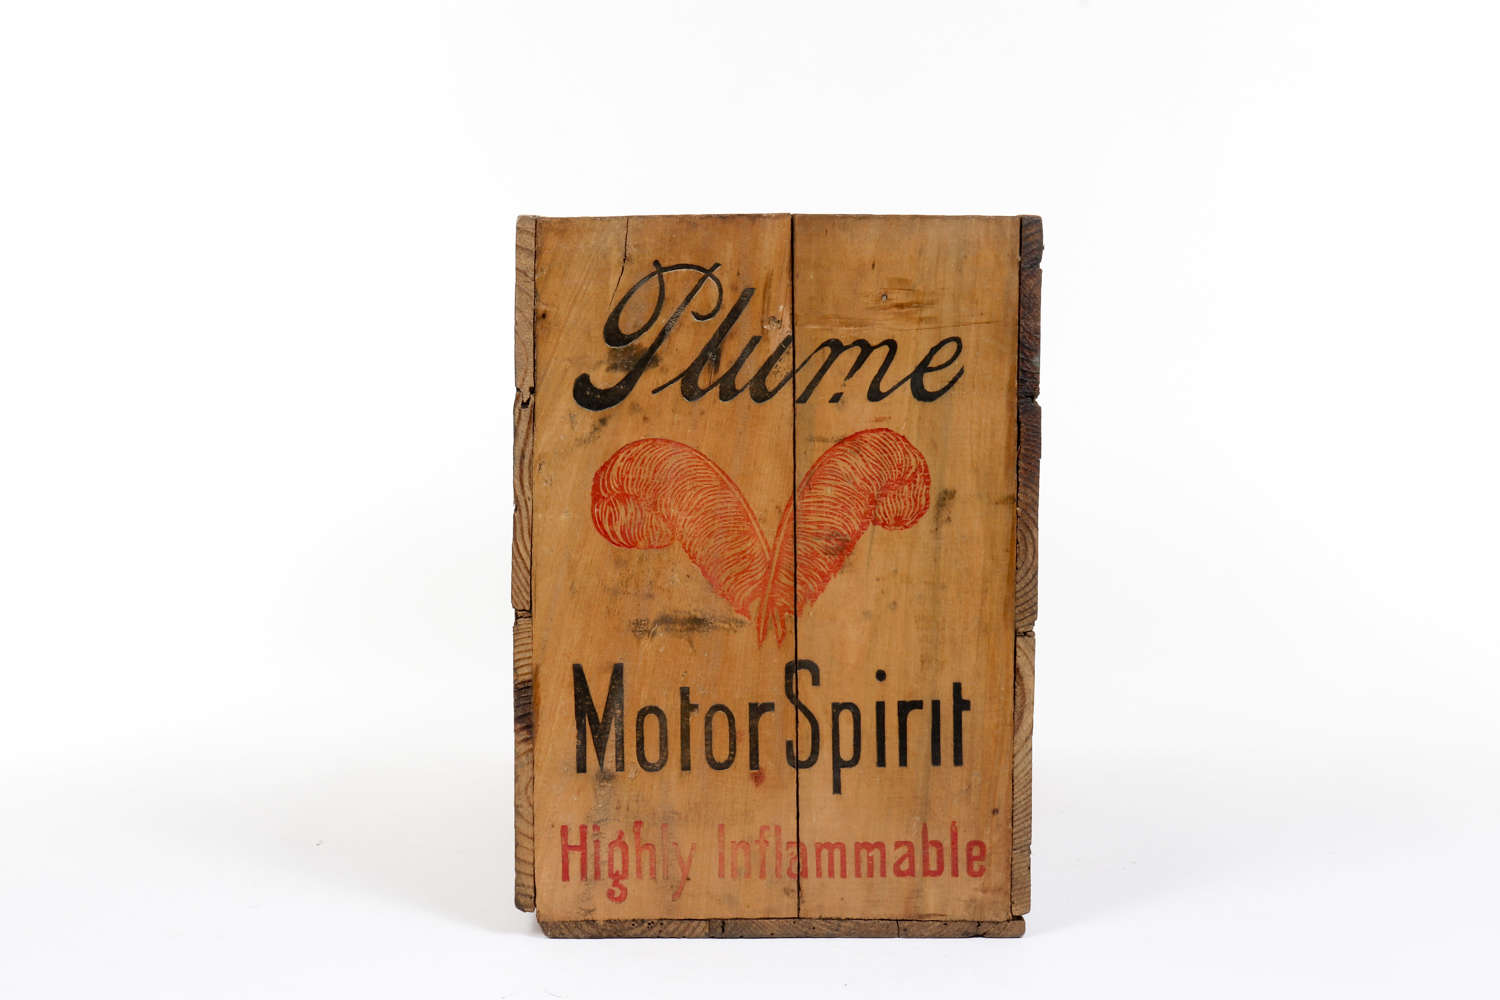 Vintage delivery box for Plume Motor Spirit by The Vacuum Oil Company